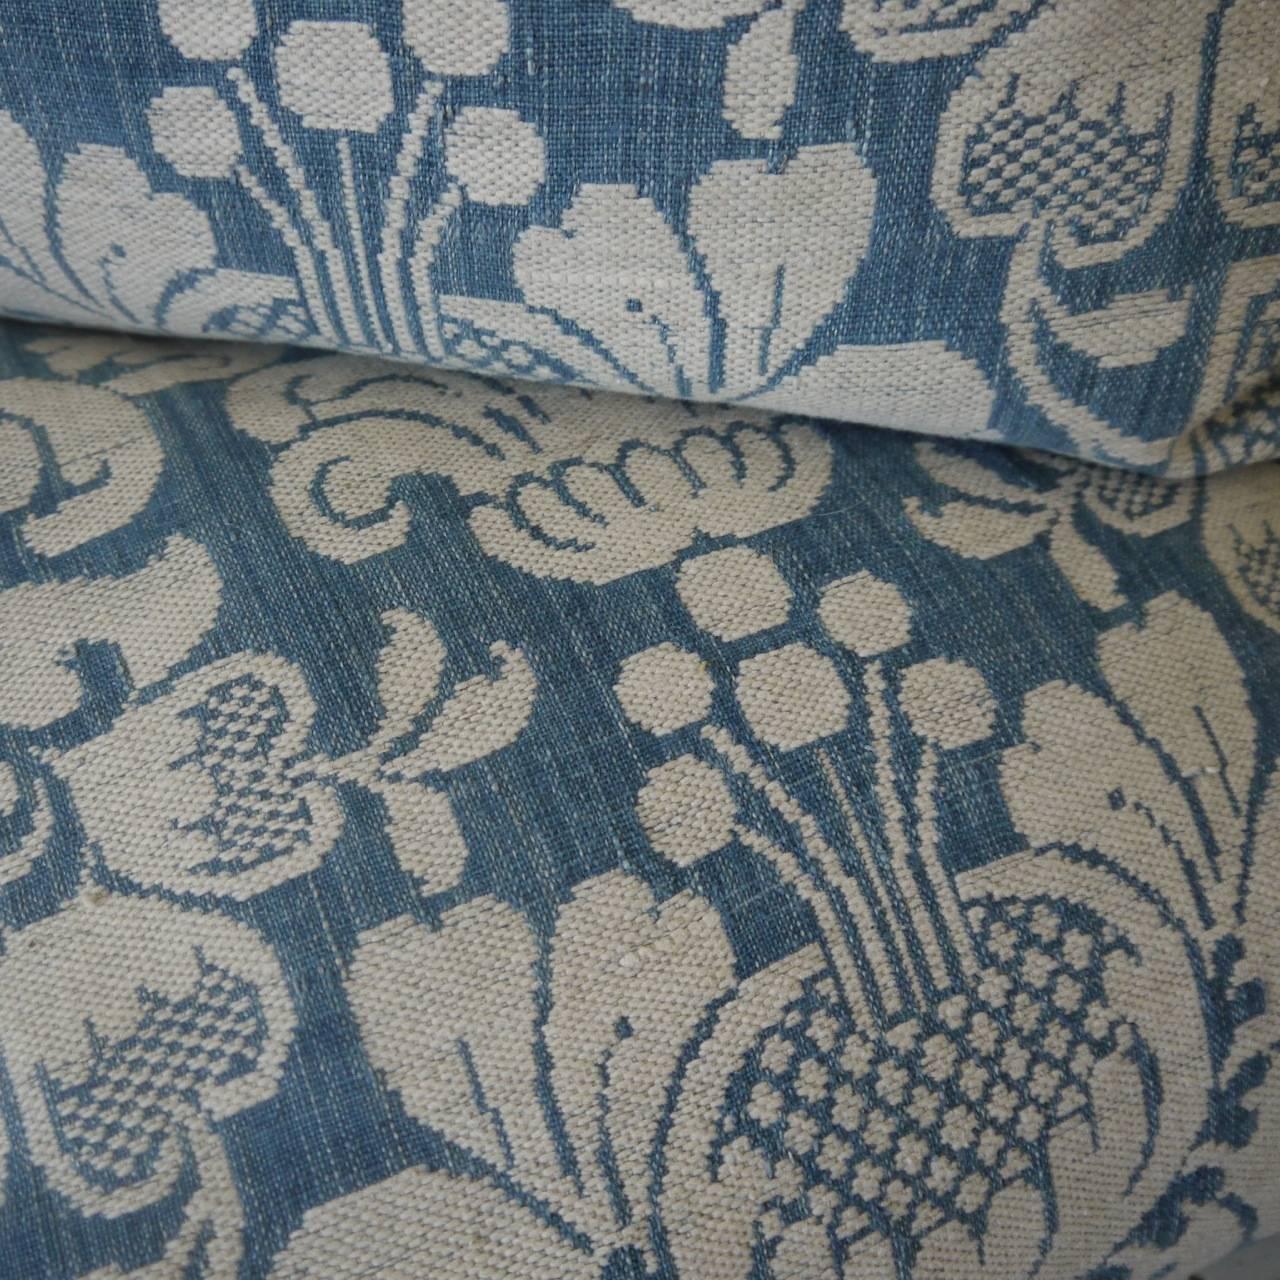 French Provincial Pair of 1760s Antique French Blue and White Linen and Cotton Woven Pillows For Sale